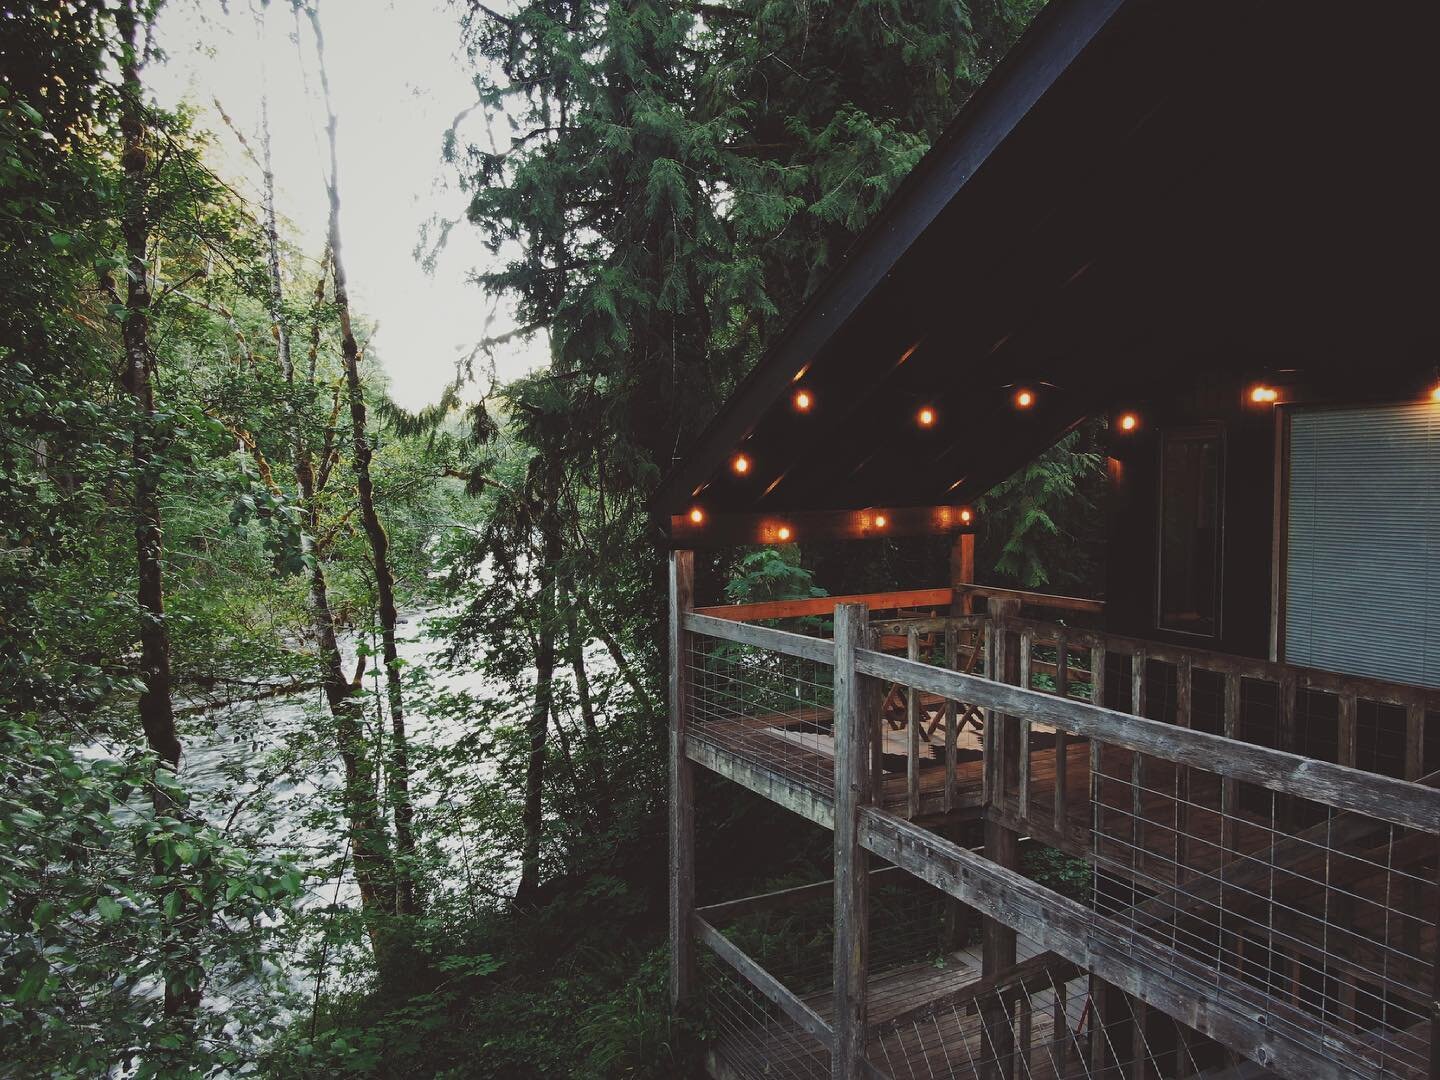 Cozy summer nights at the McKenzie River cabin getaway. Upper and Lower spaces are available or rent the whole place for larger groups. The sound of the rushing river soothes the soul.